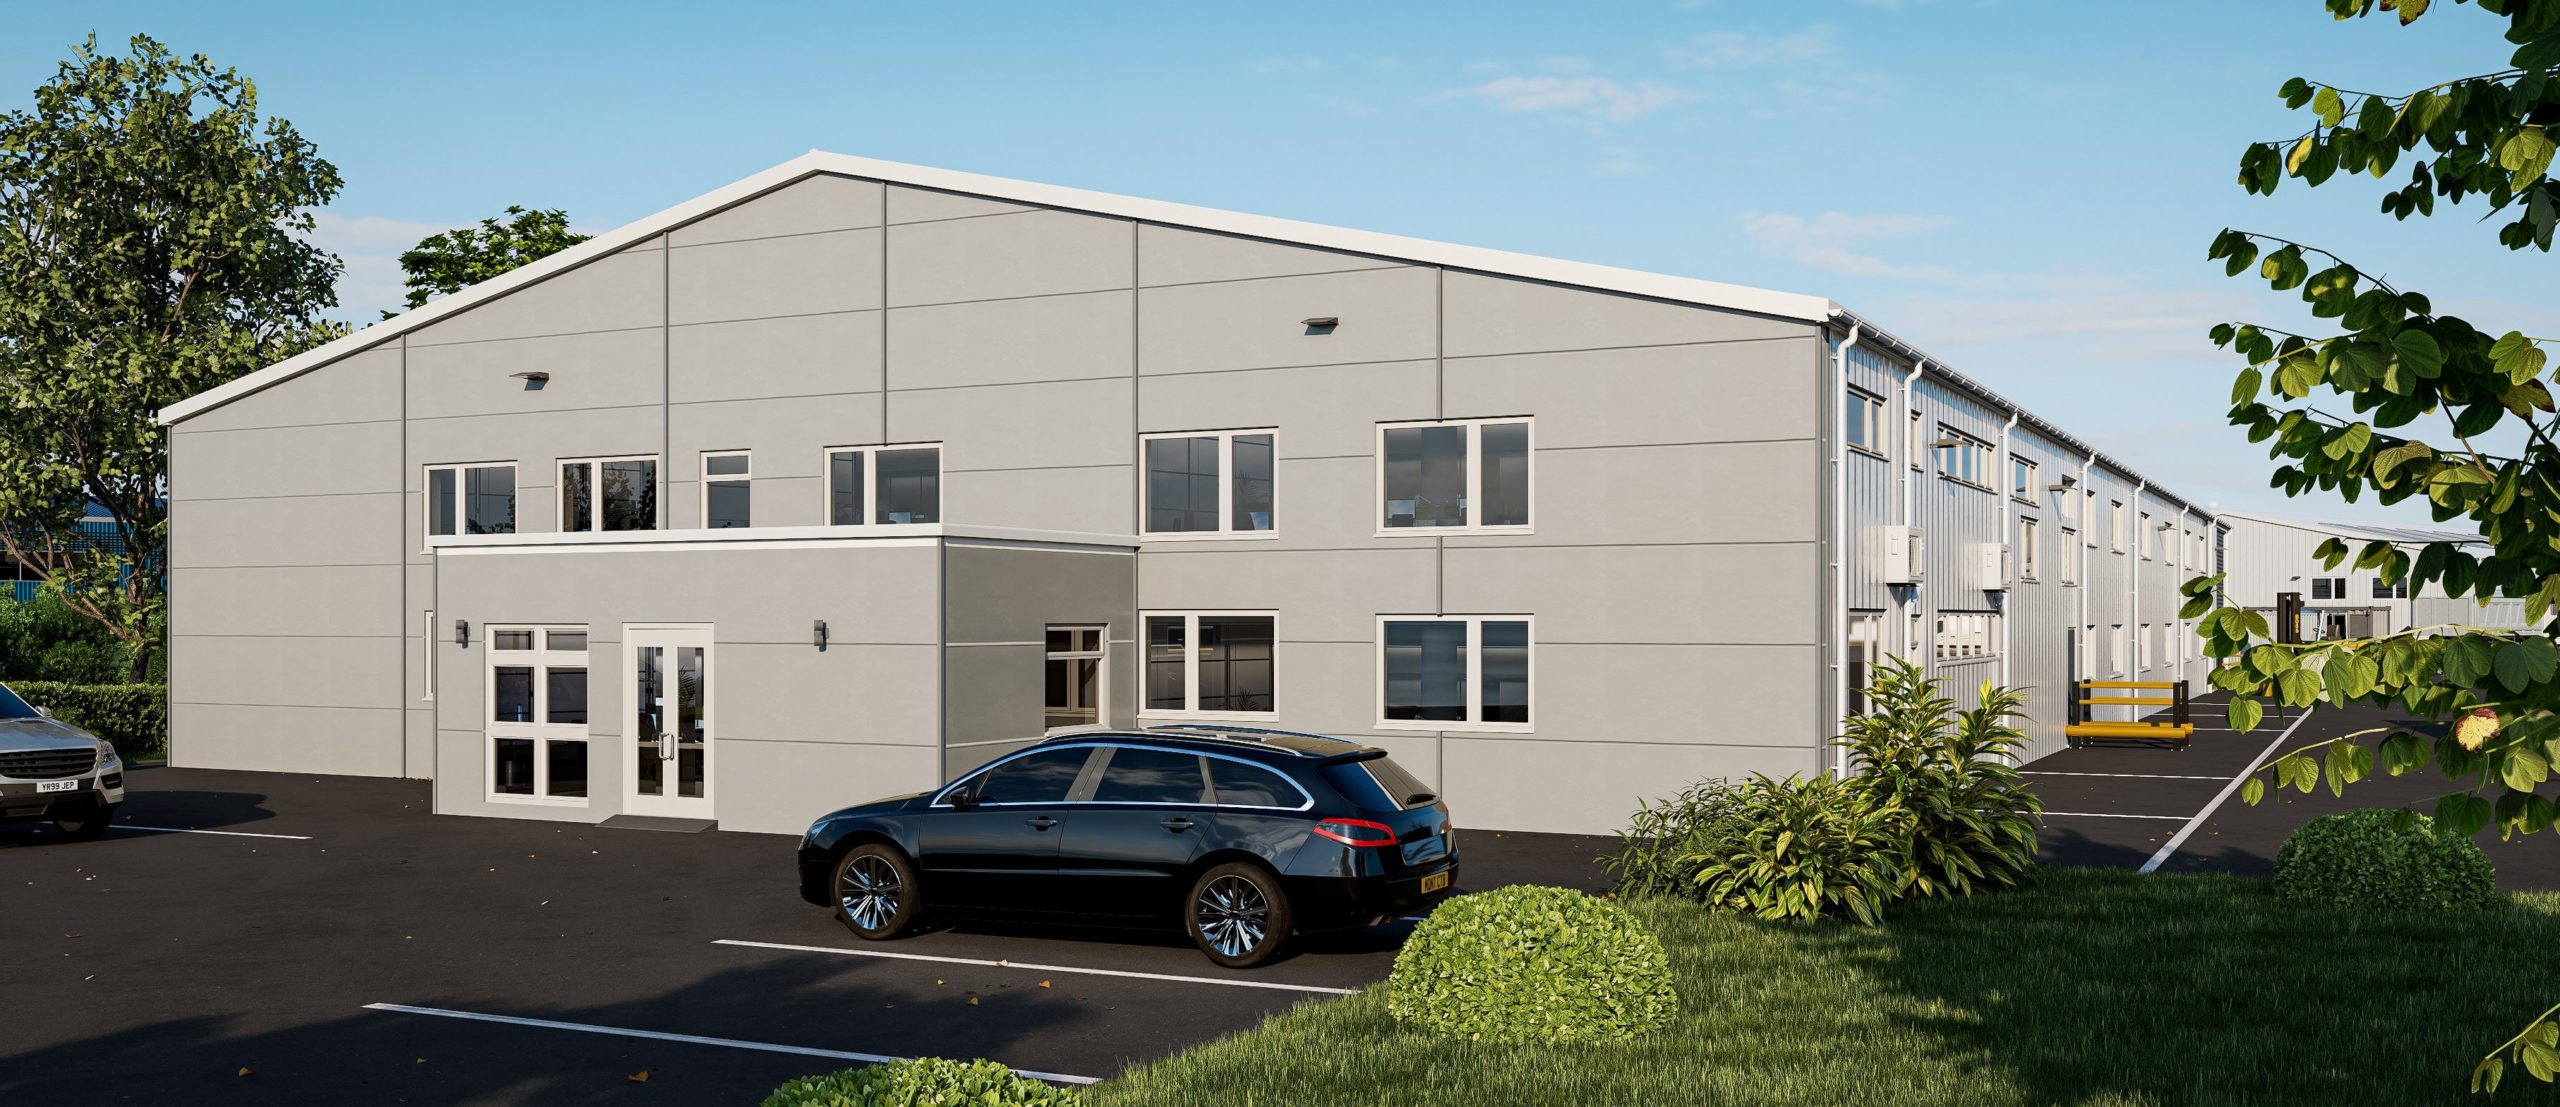 Leading plumbing industry distributor Navigator MSL has been given the go ahead to begin a major £1 million redevelopment of its headquarters in Sharnbrook, near Bedford.